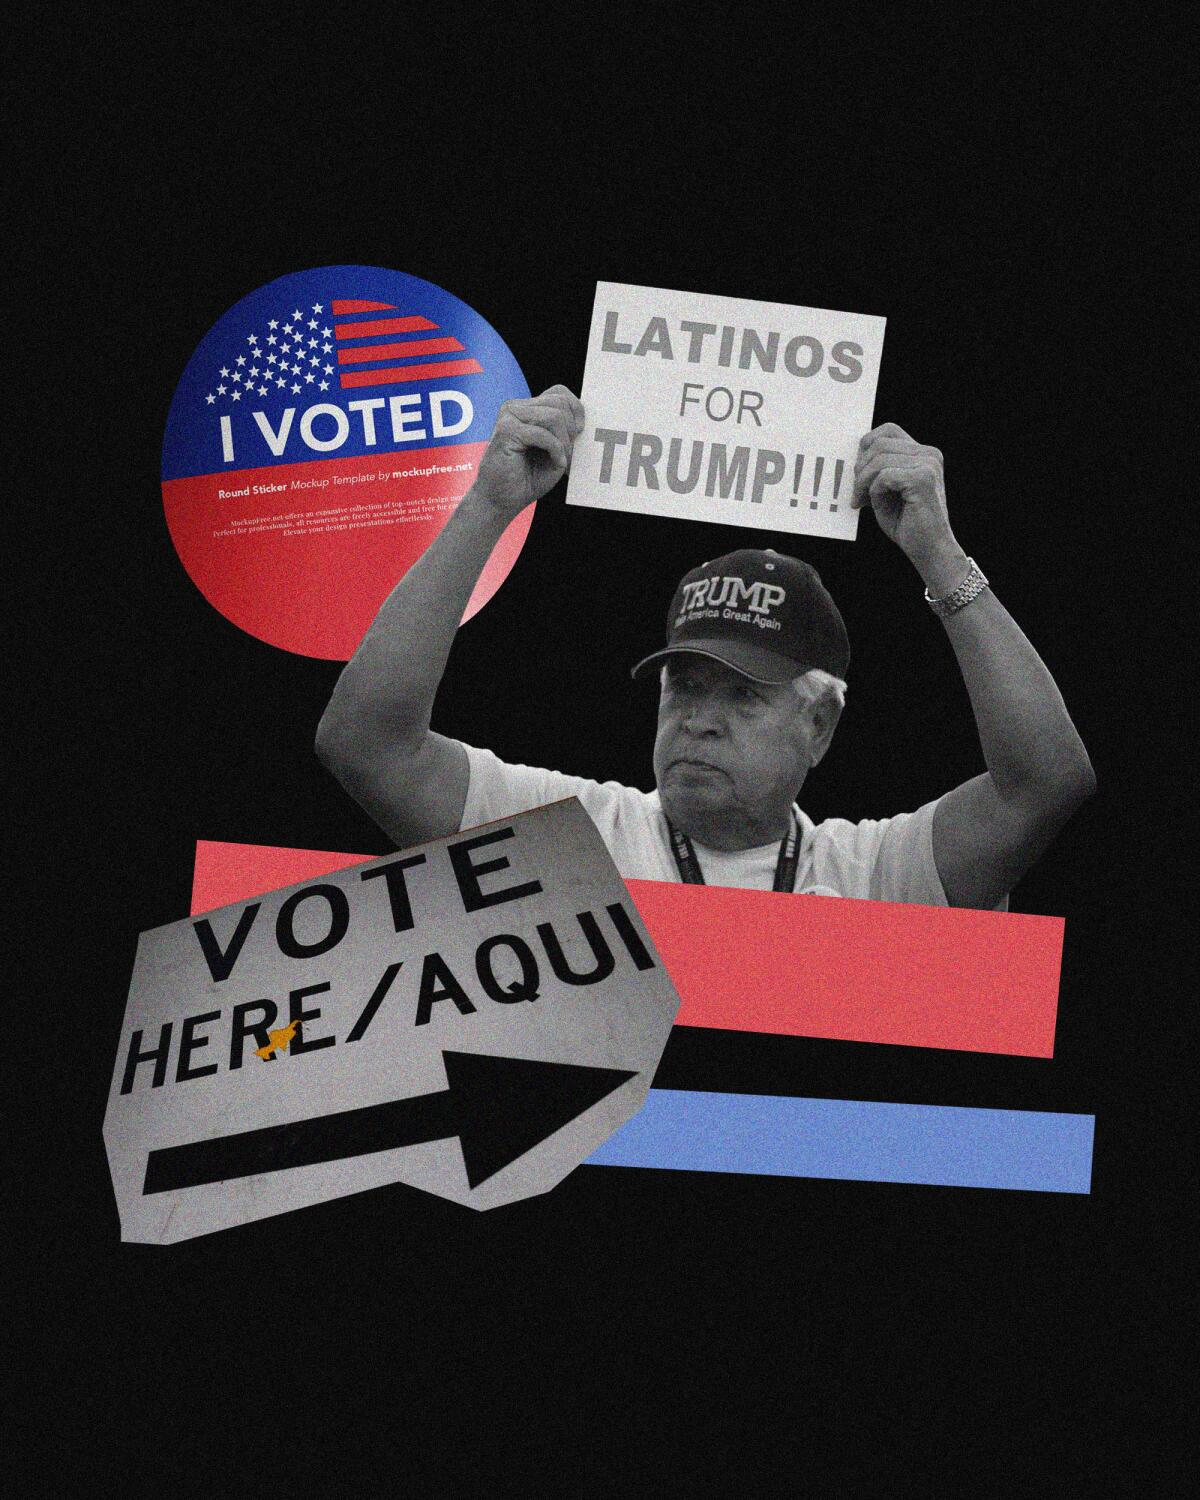 A collage with photos of an "I voted" sticker, a "Vote here/aqui" sign, and a man with a sign reading "Latinos for Trump!!!"